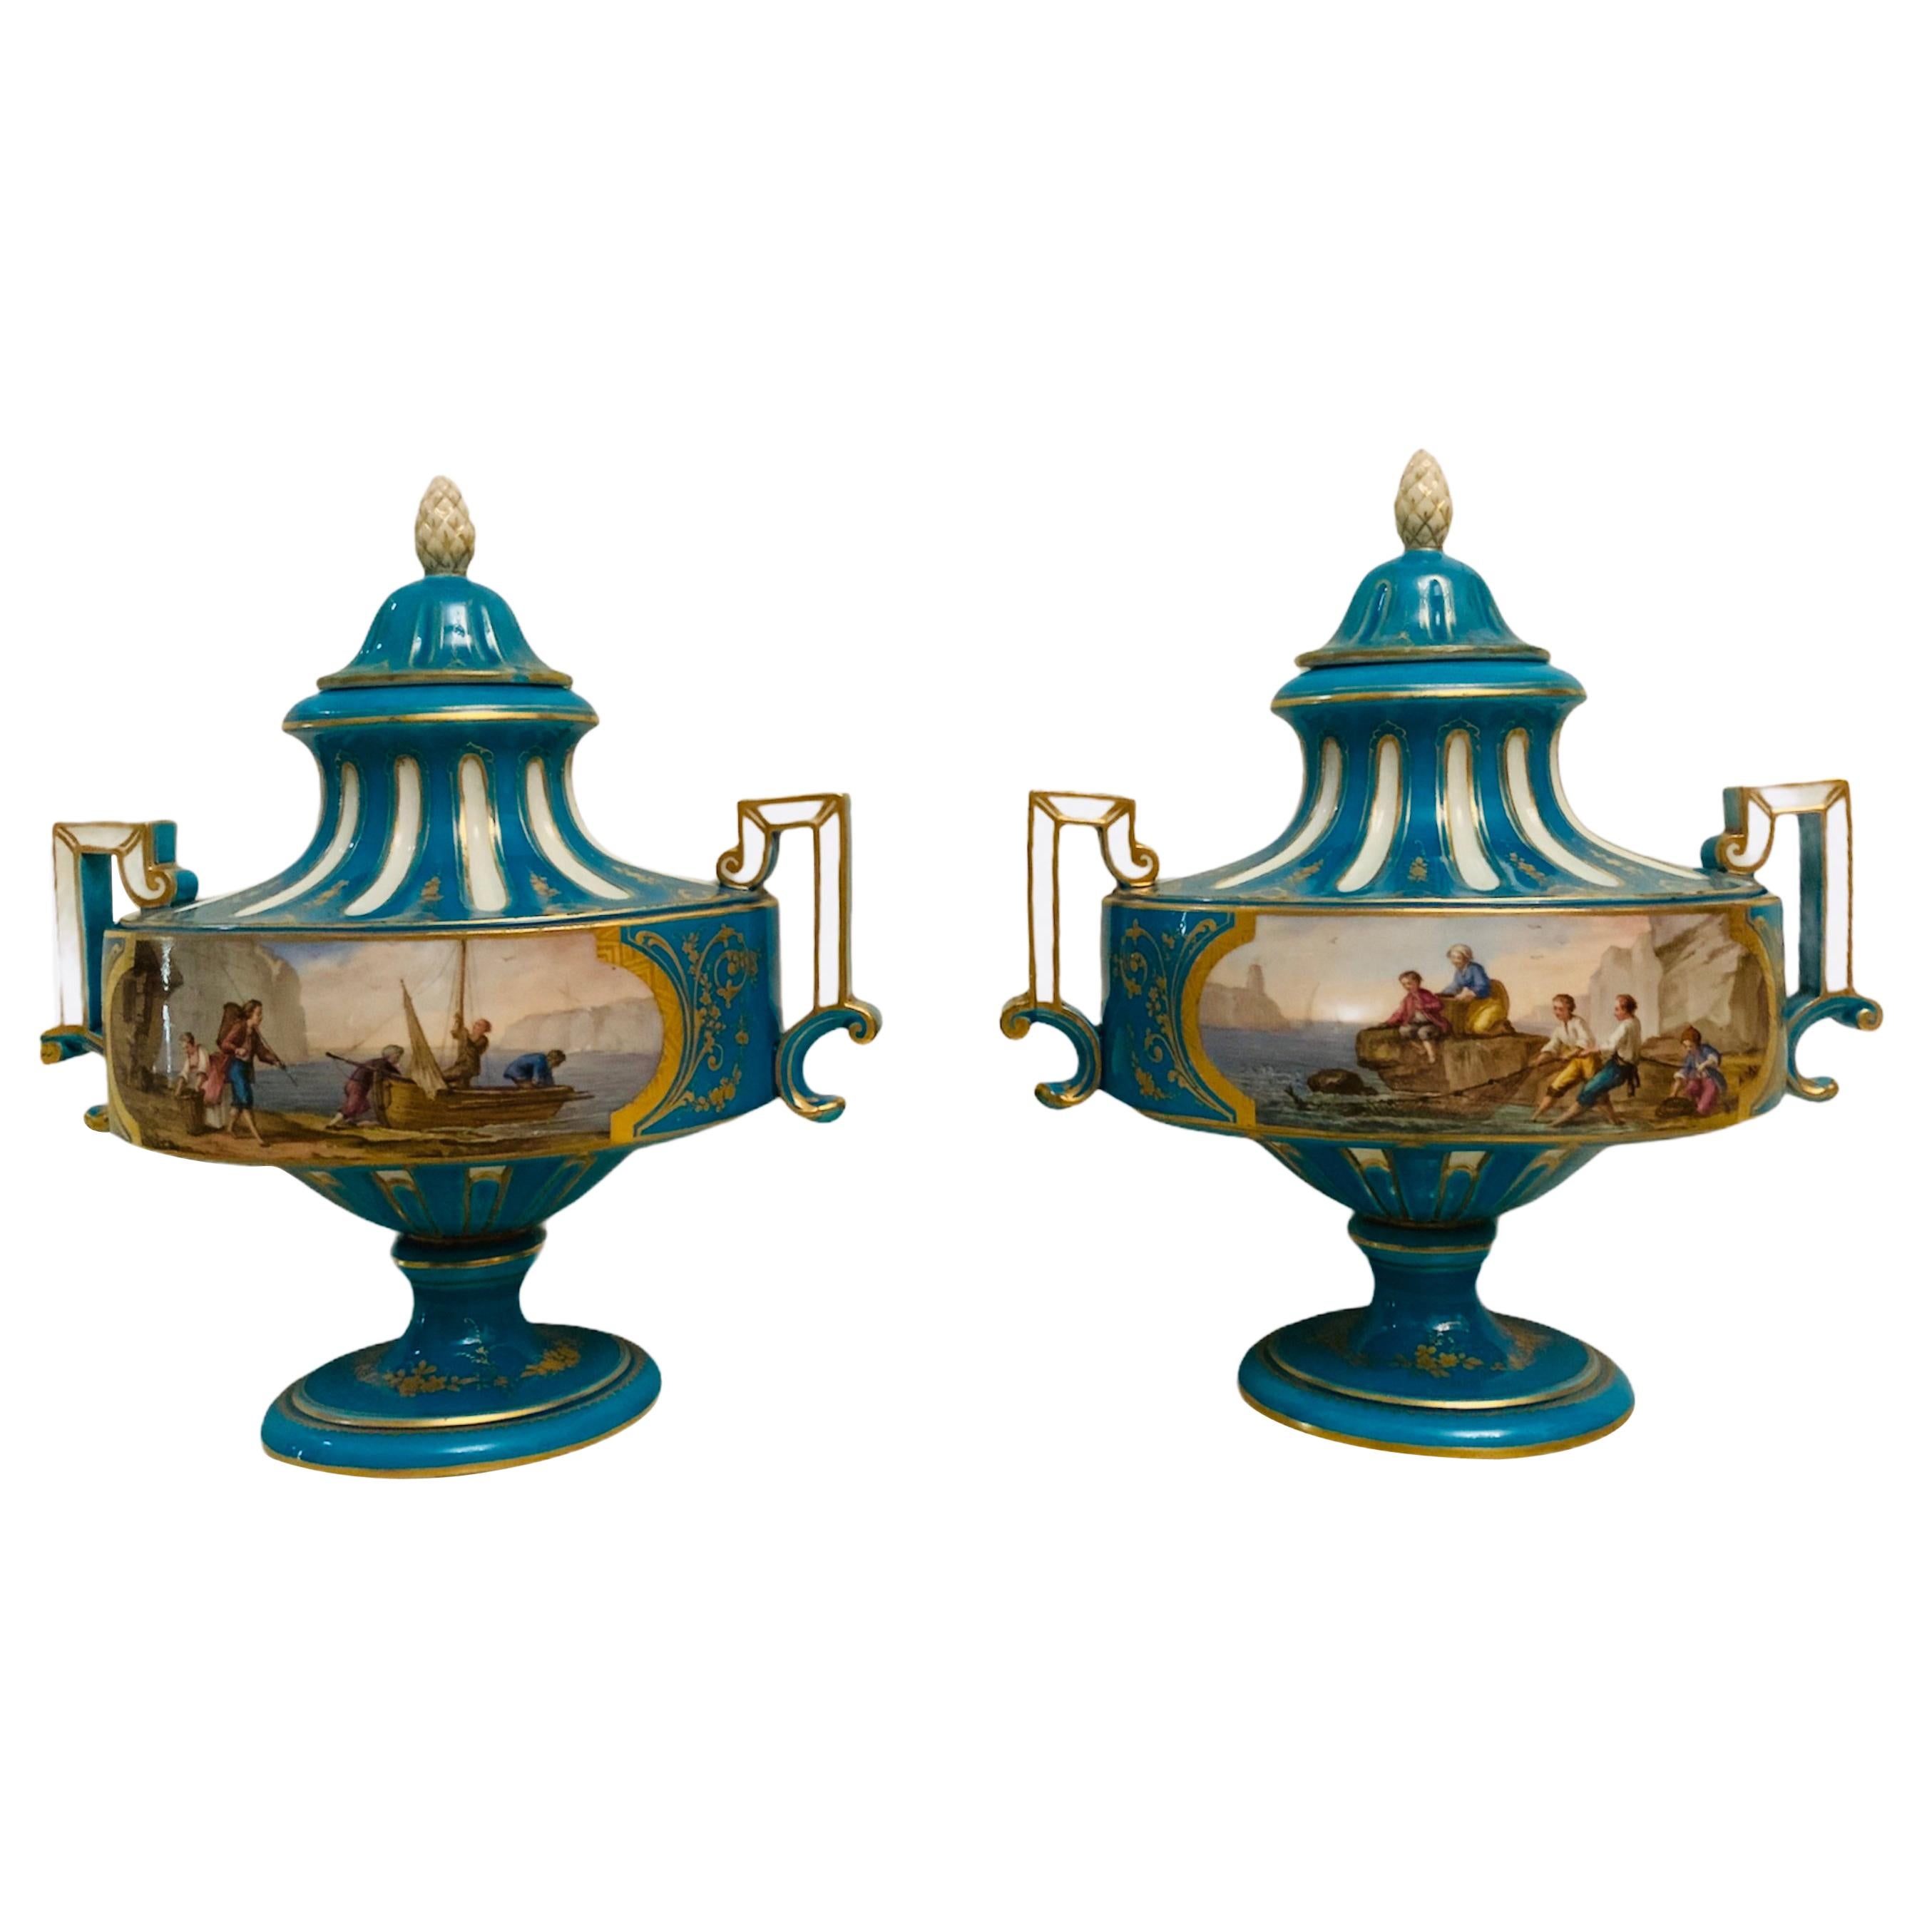 Pair of Sevres Hand Painted Turquoise Porcelain Lidded Urns